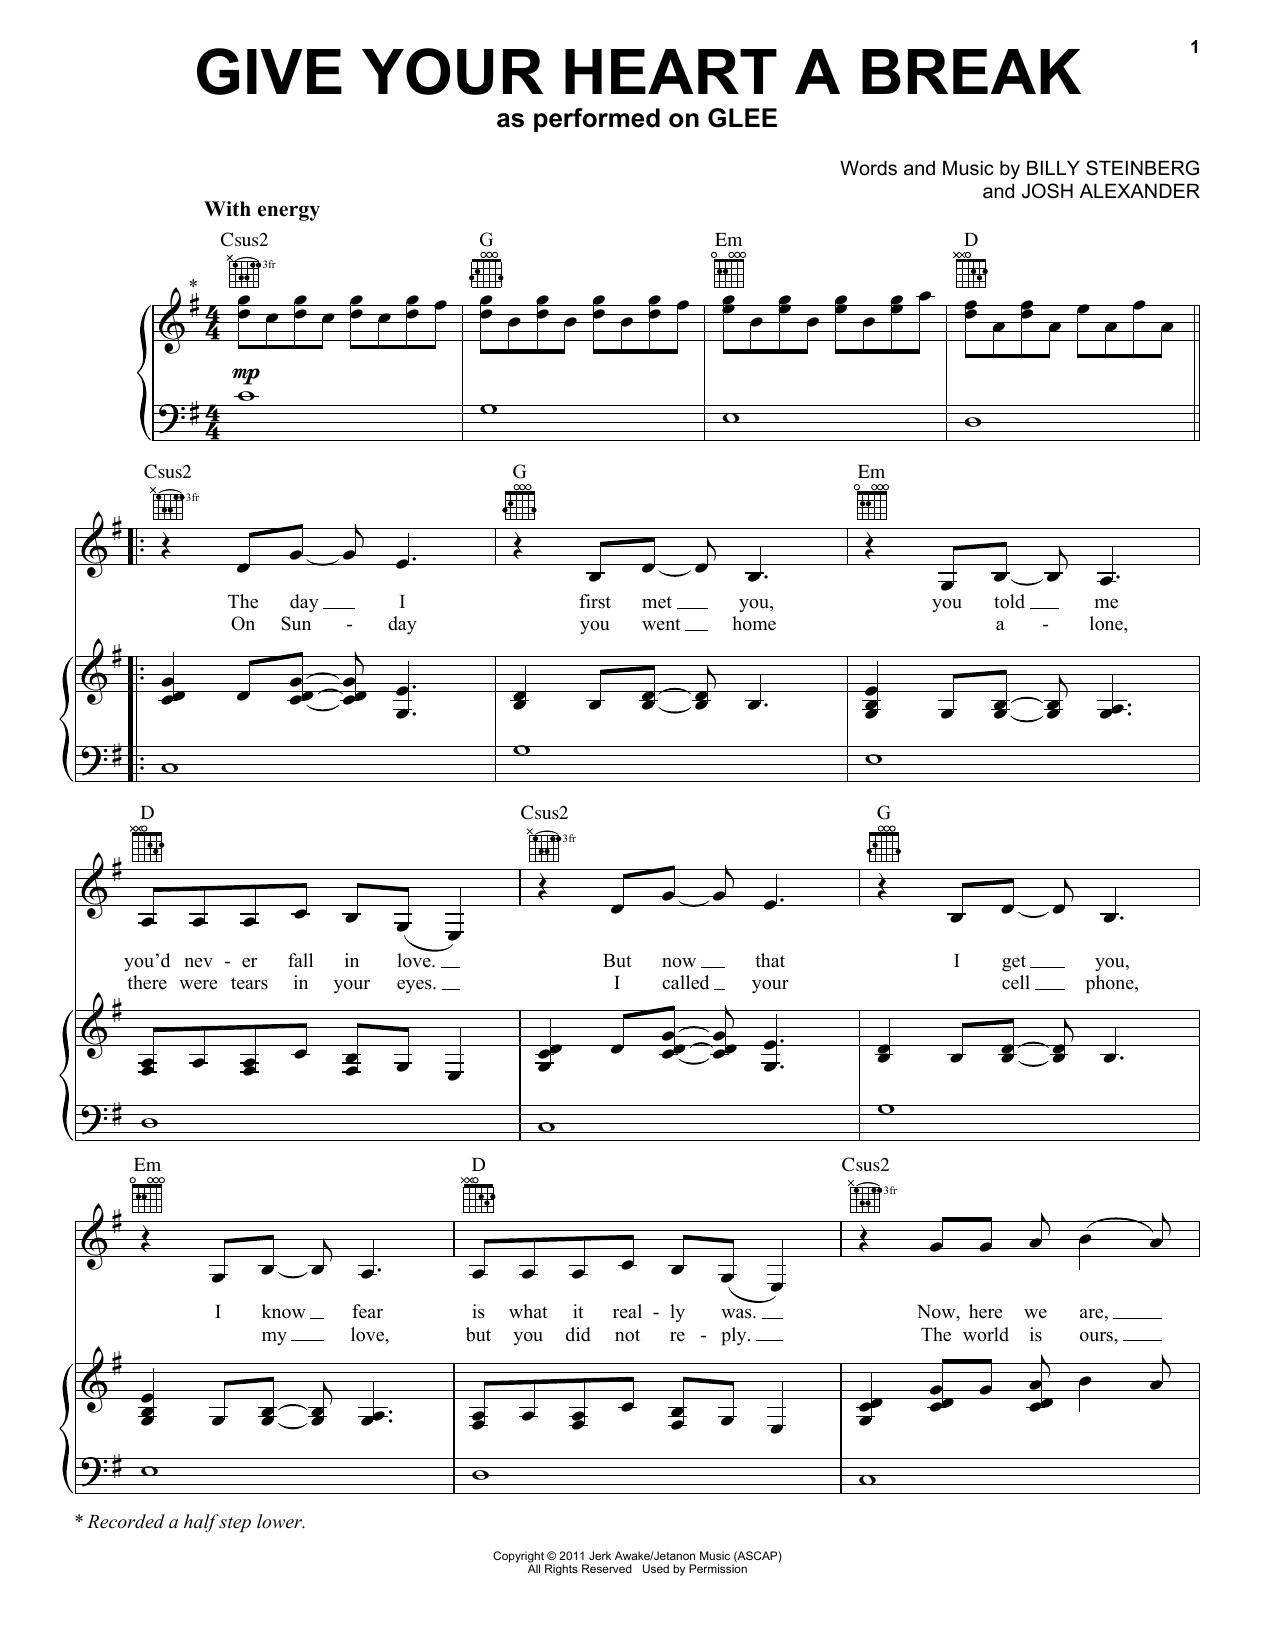 Glee Cast Give Your Heart A Break sheet music notes and chords. Download Printable PDF.